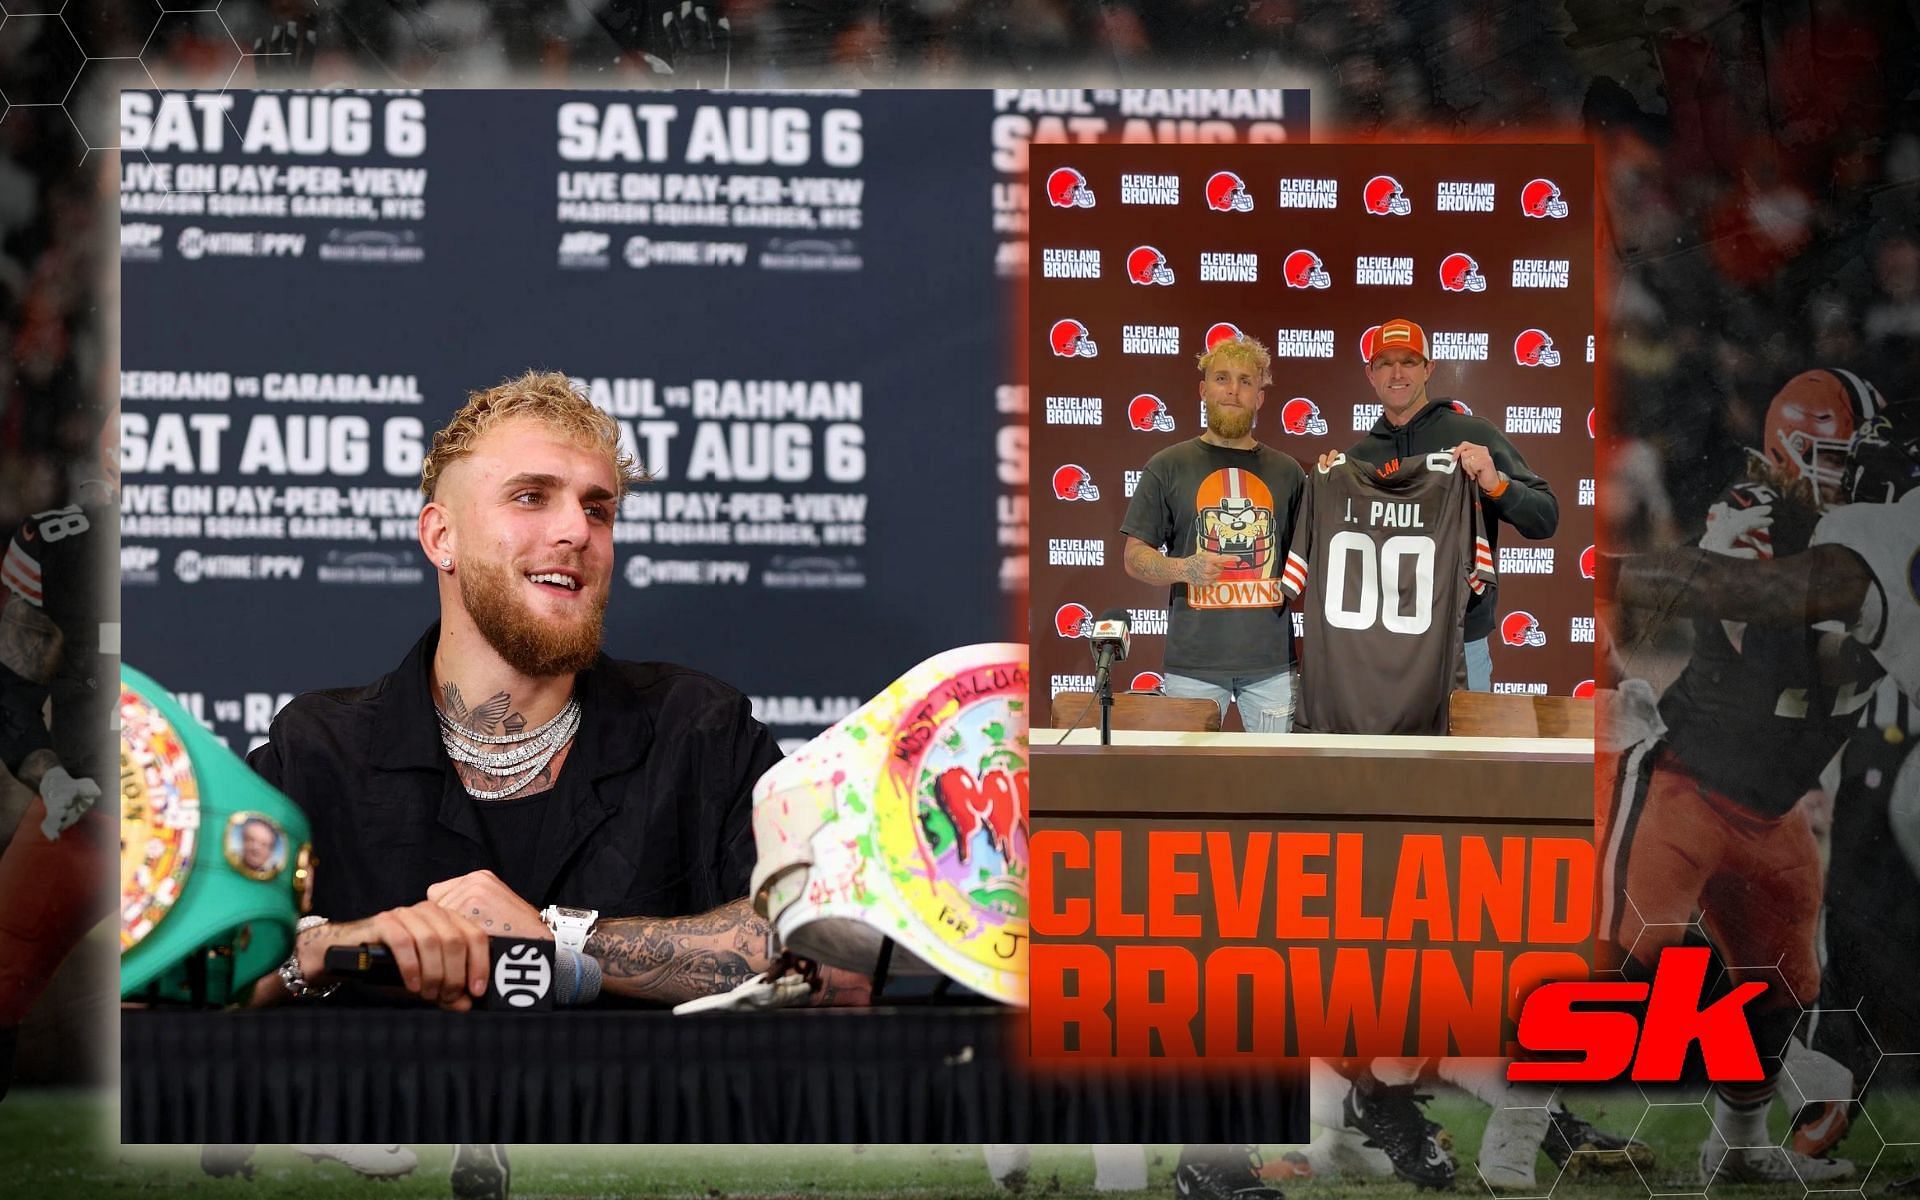 Jake Paul signs contract with hometown NFL team Cleveland Browns. [Image credits: @clevelandbrowns on Instagram; Getty Images]